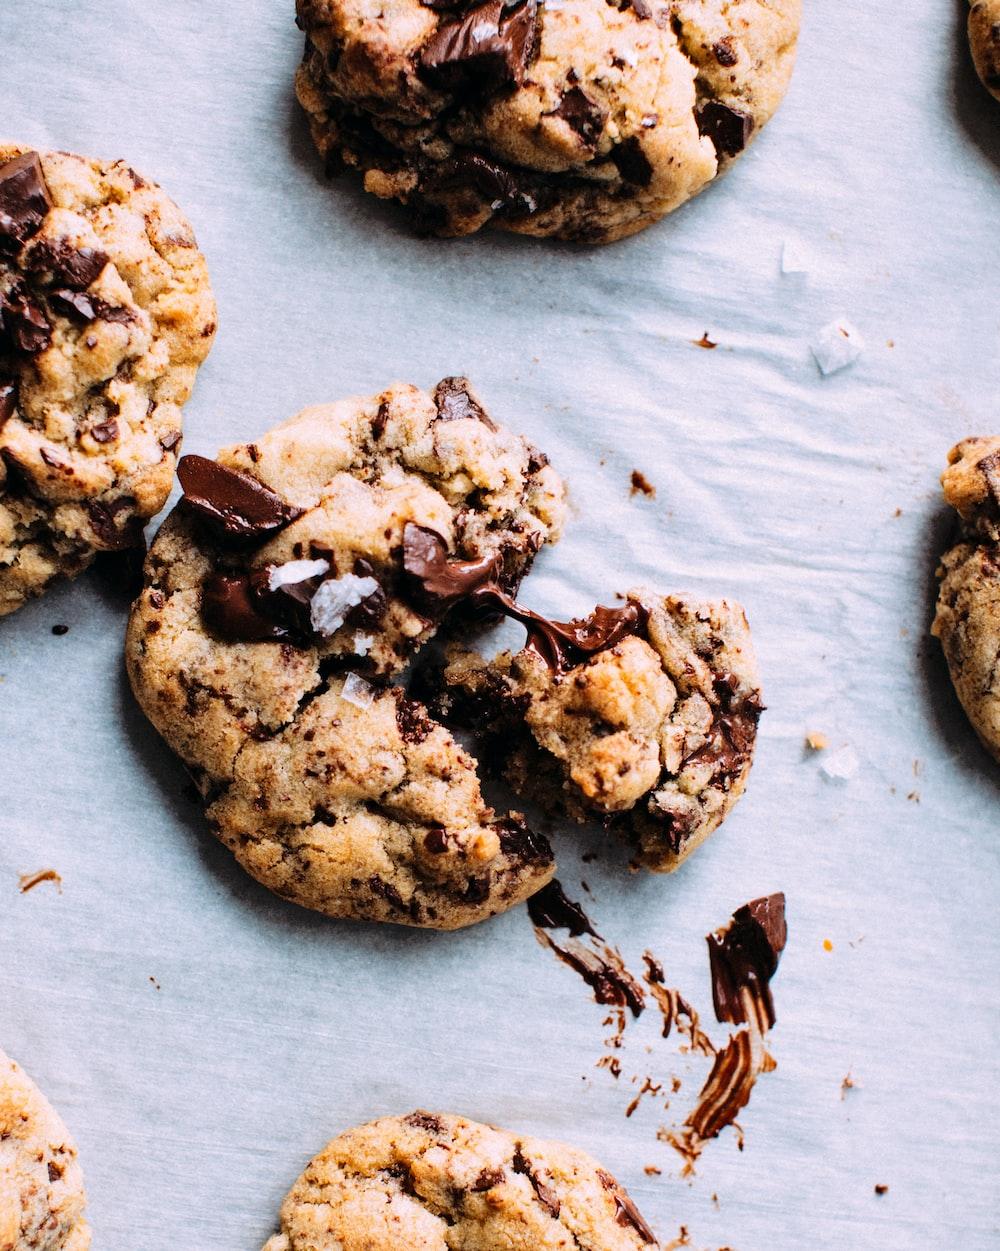 The Real Food Academy Miami chocolate chip cookies recipe.